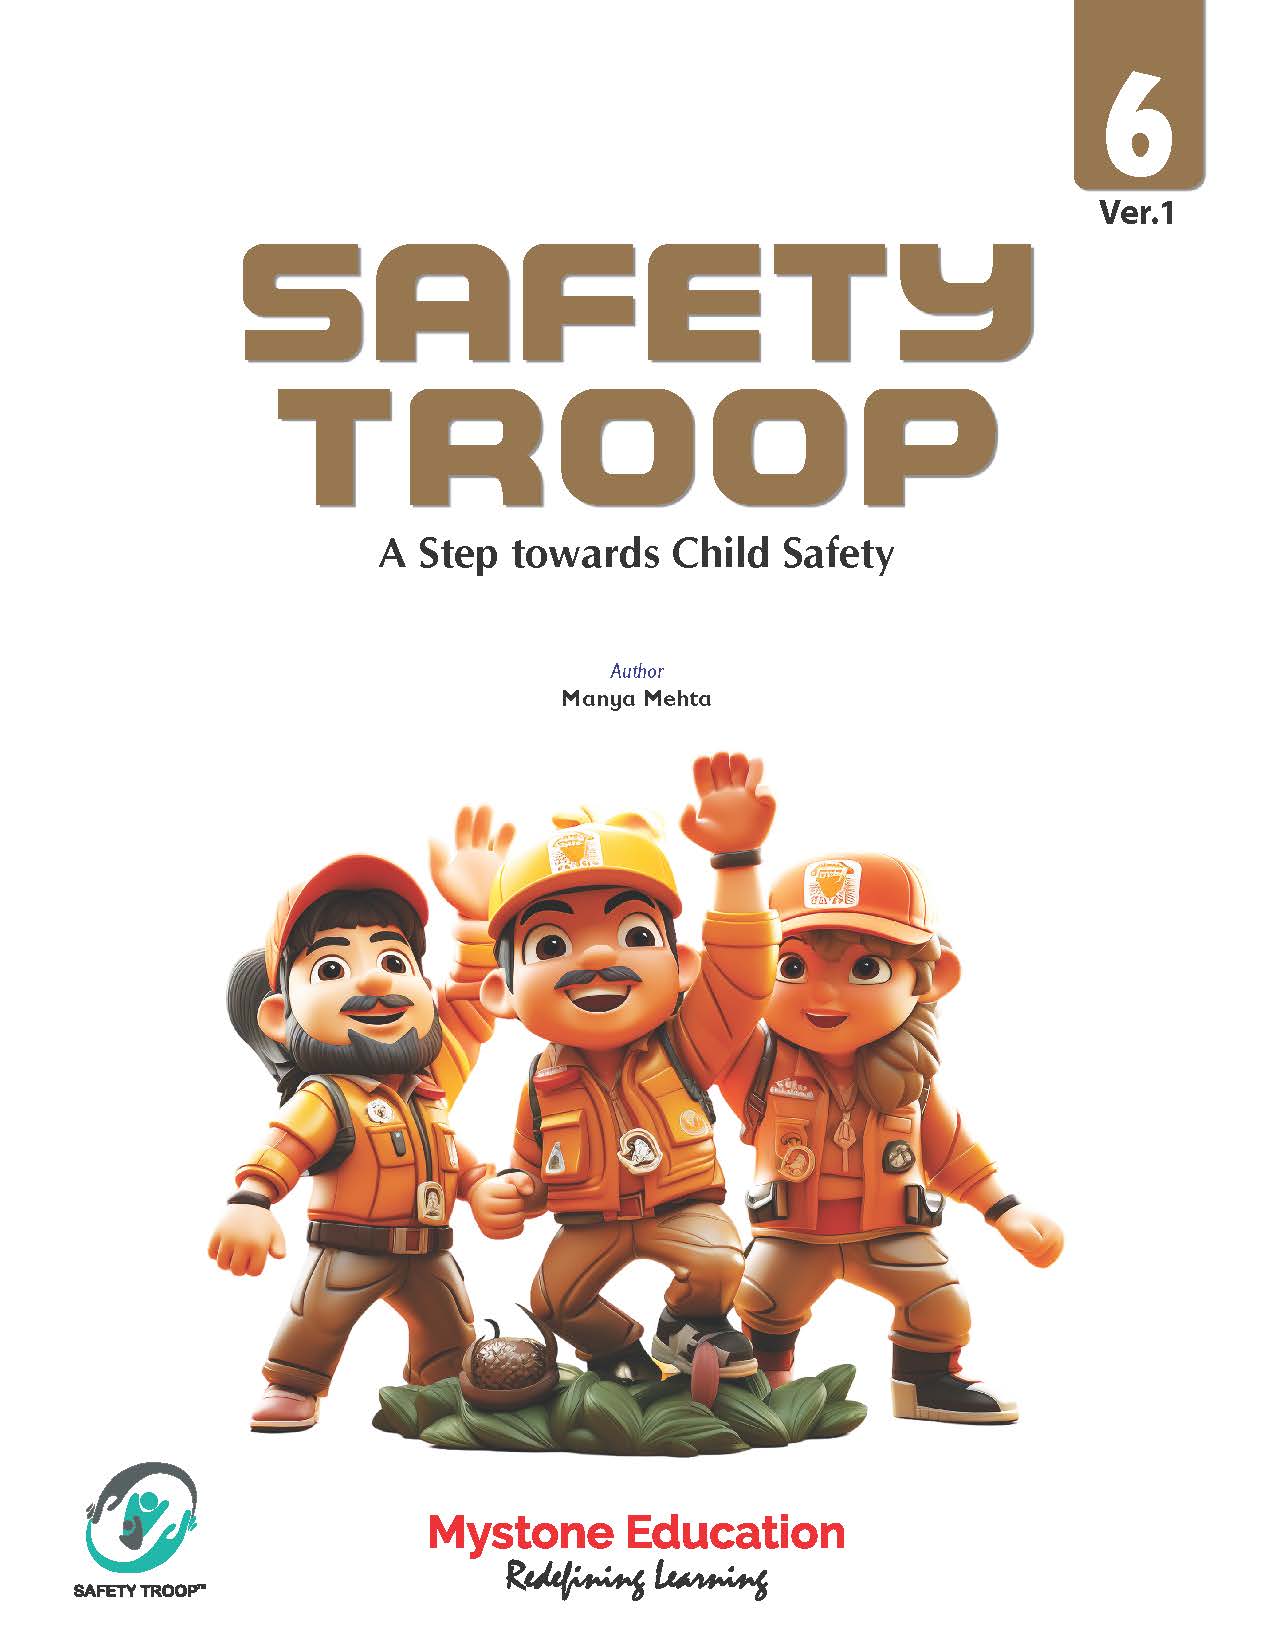 Safety Troop (A Step Towards Child Safety) Class 6 Ver 1